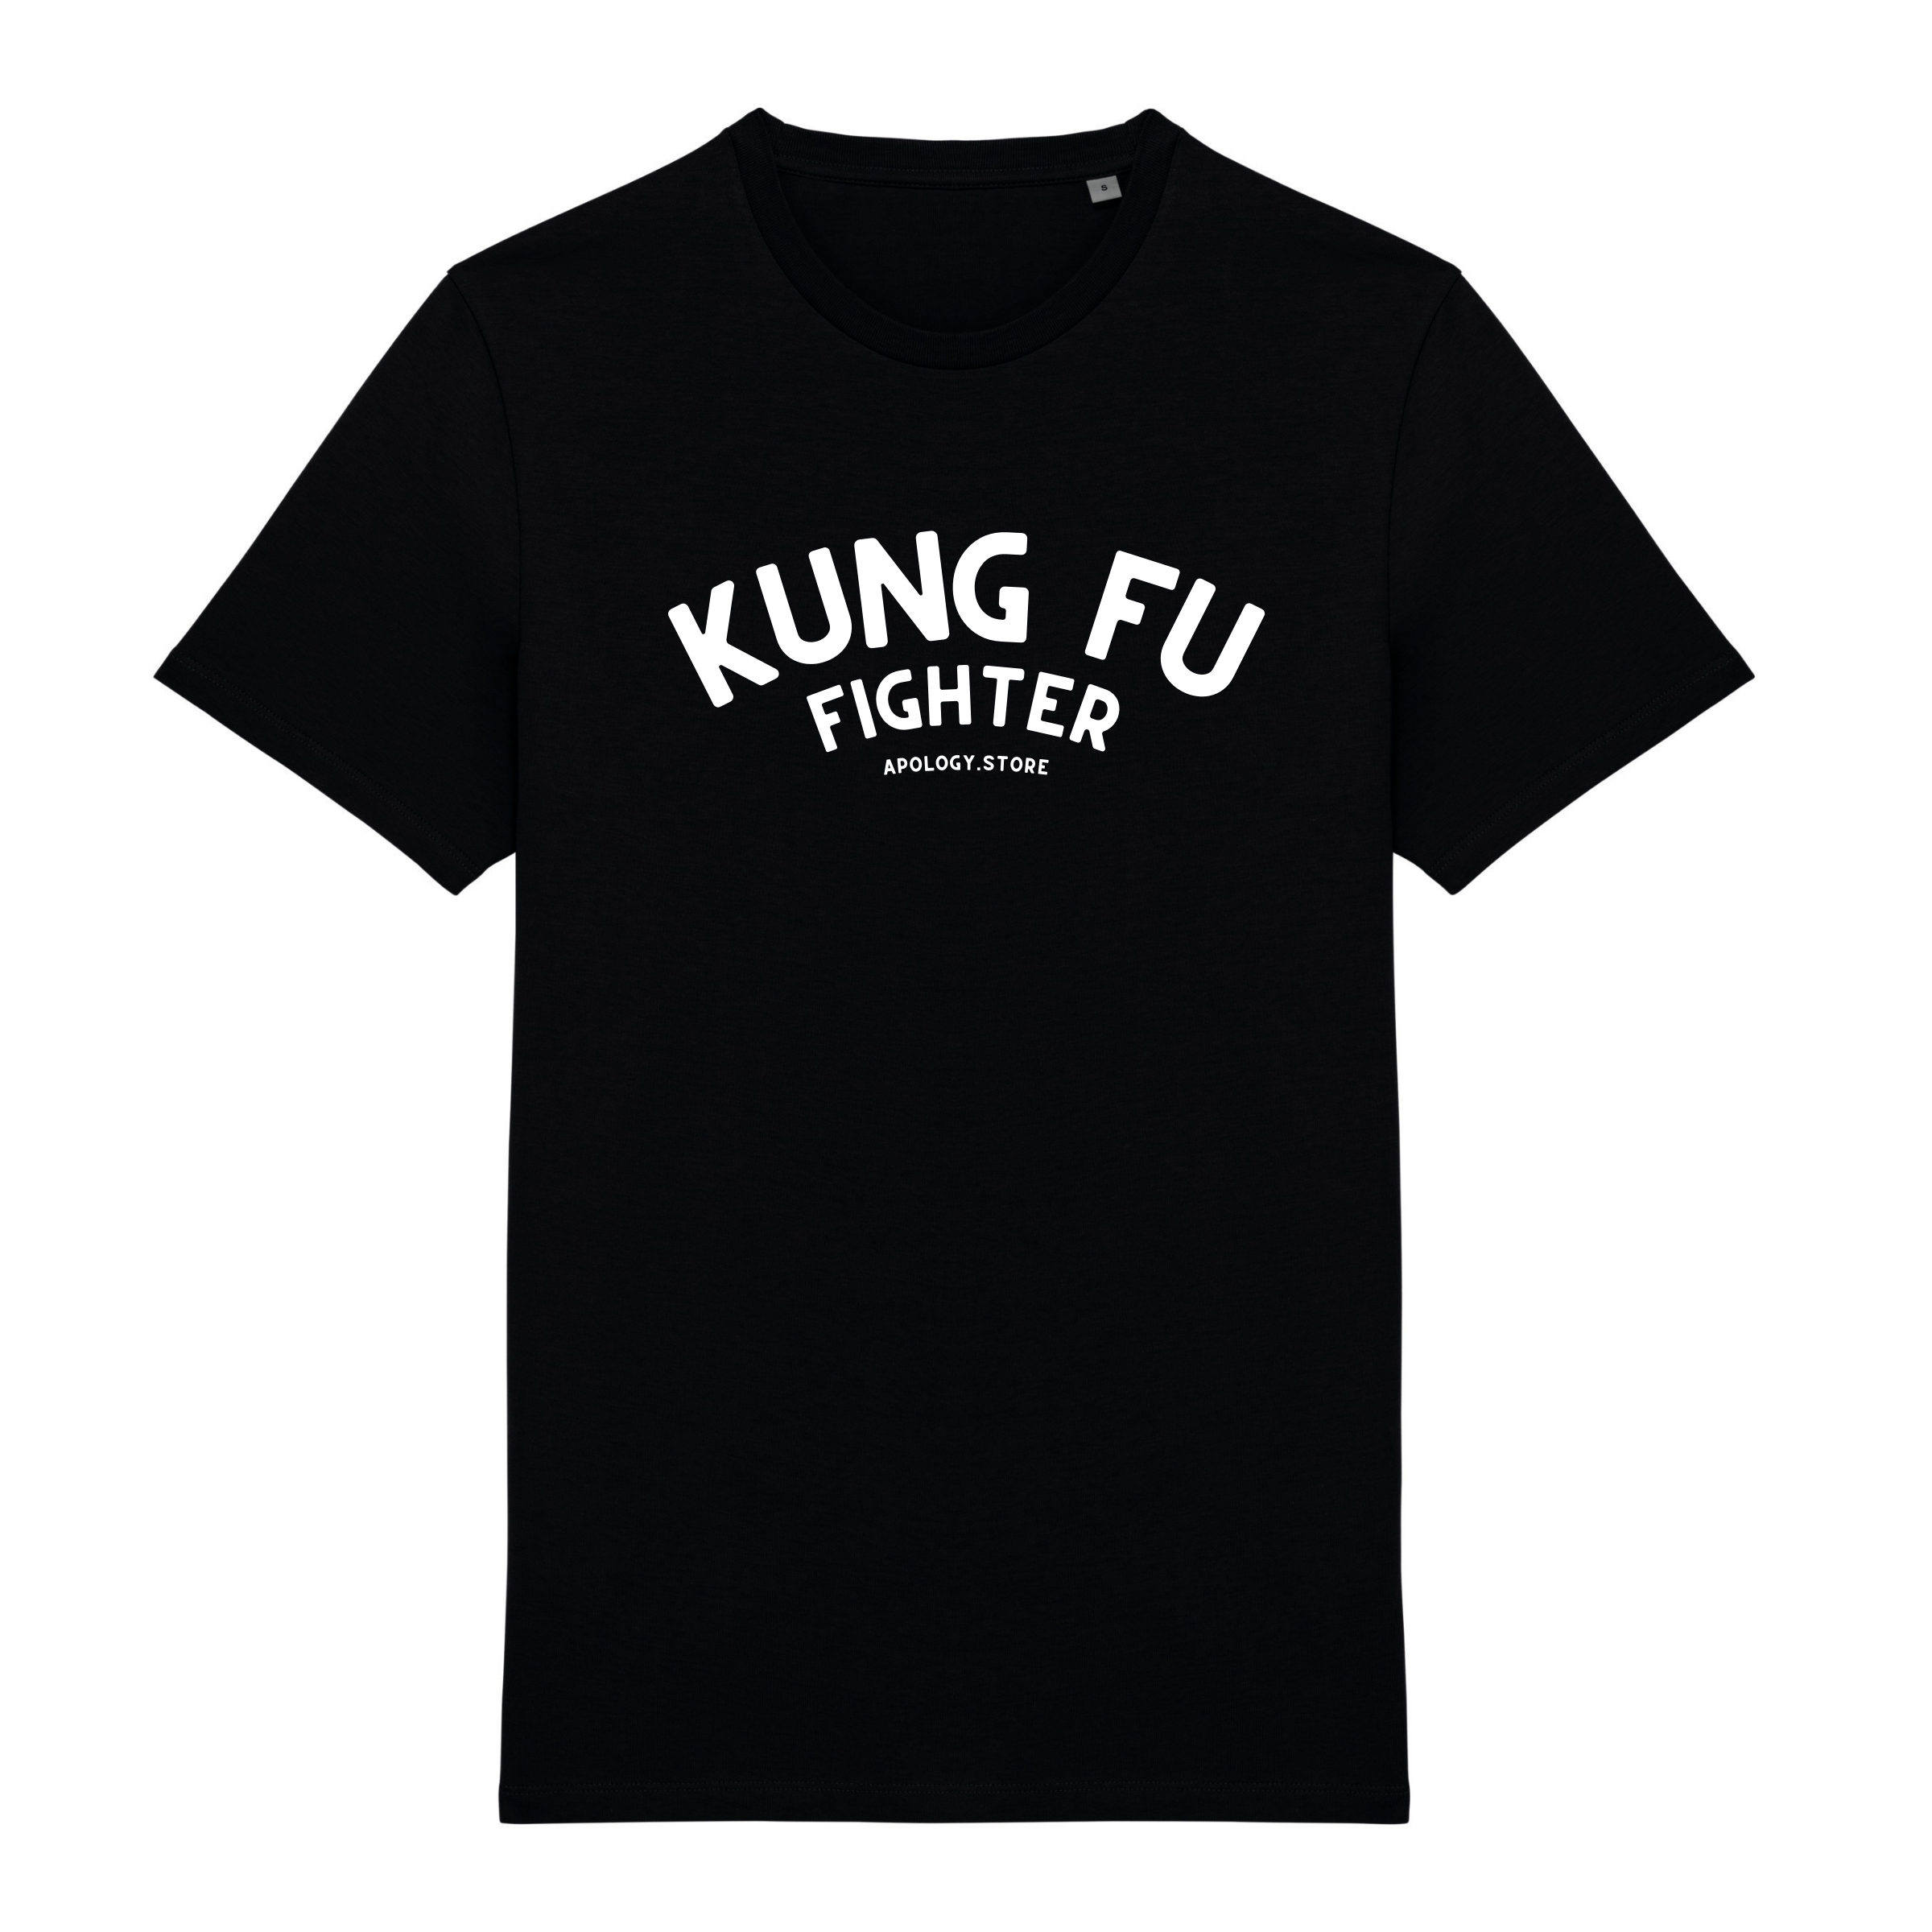 Kung Fu Fighter T-shirt - Made in Portugal